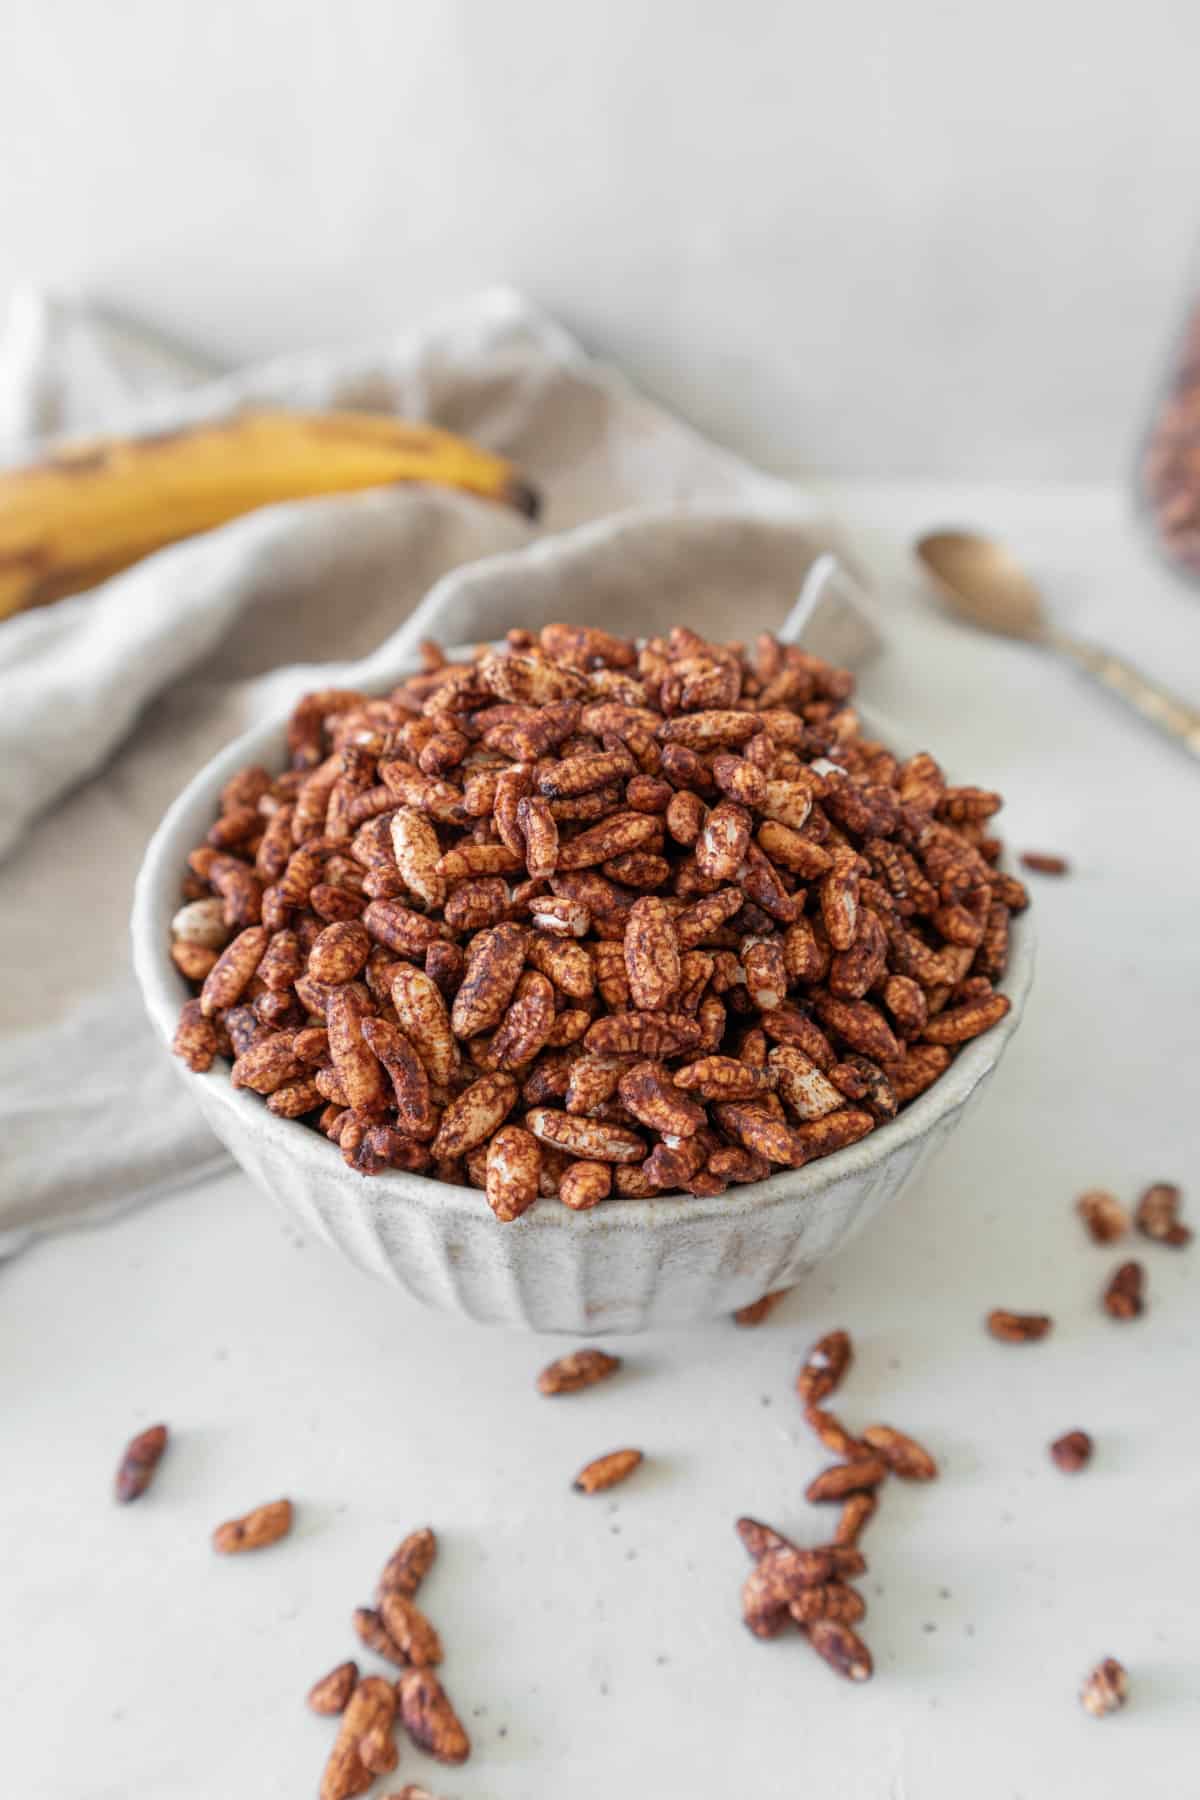 Healthy chocolate puffed rice cereal recipe